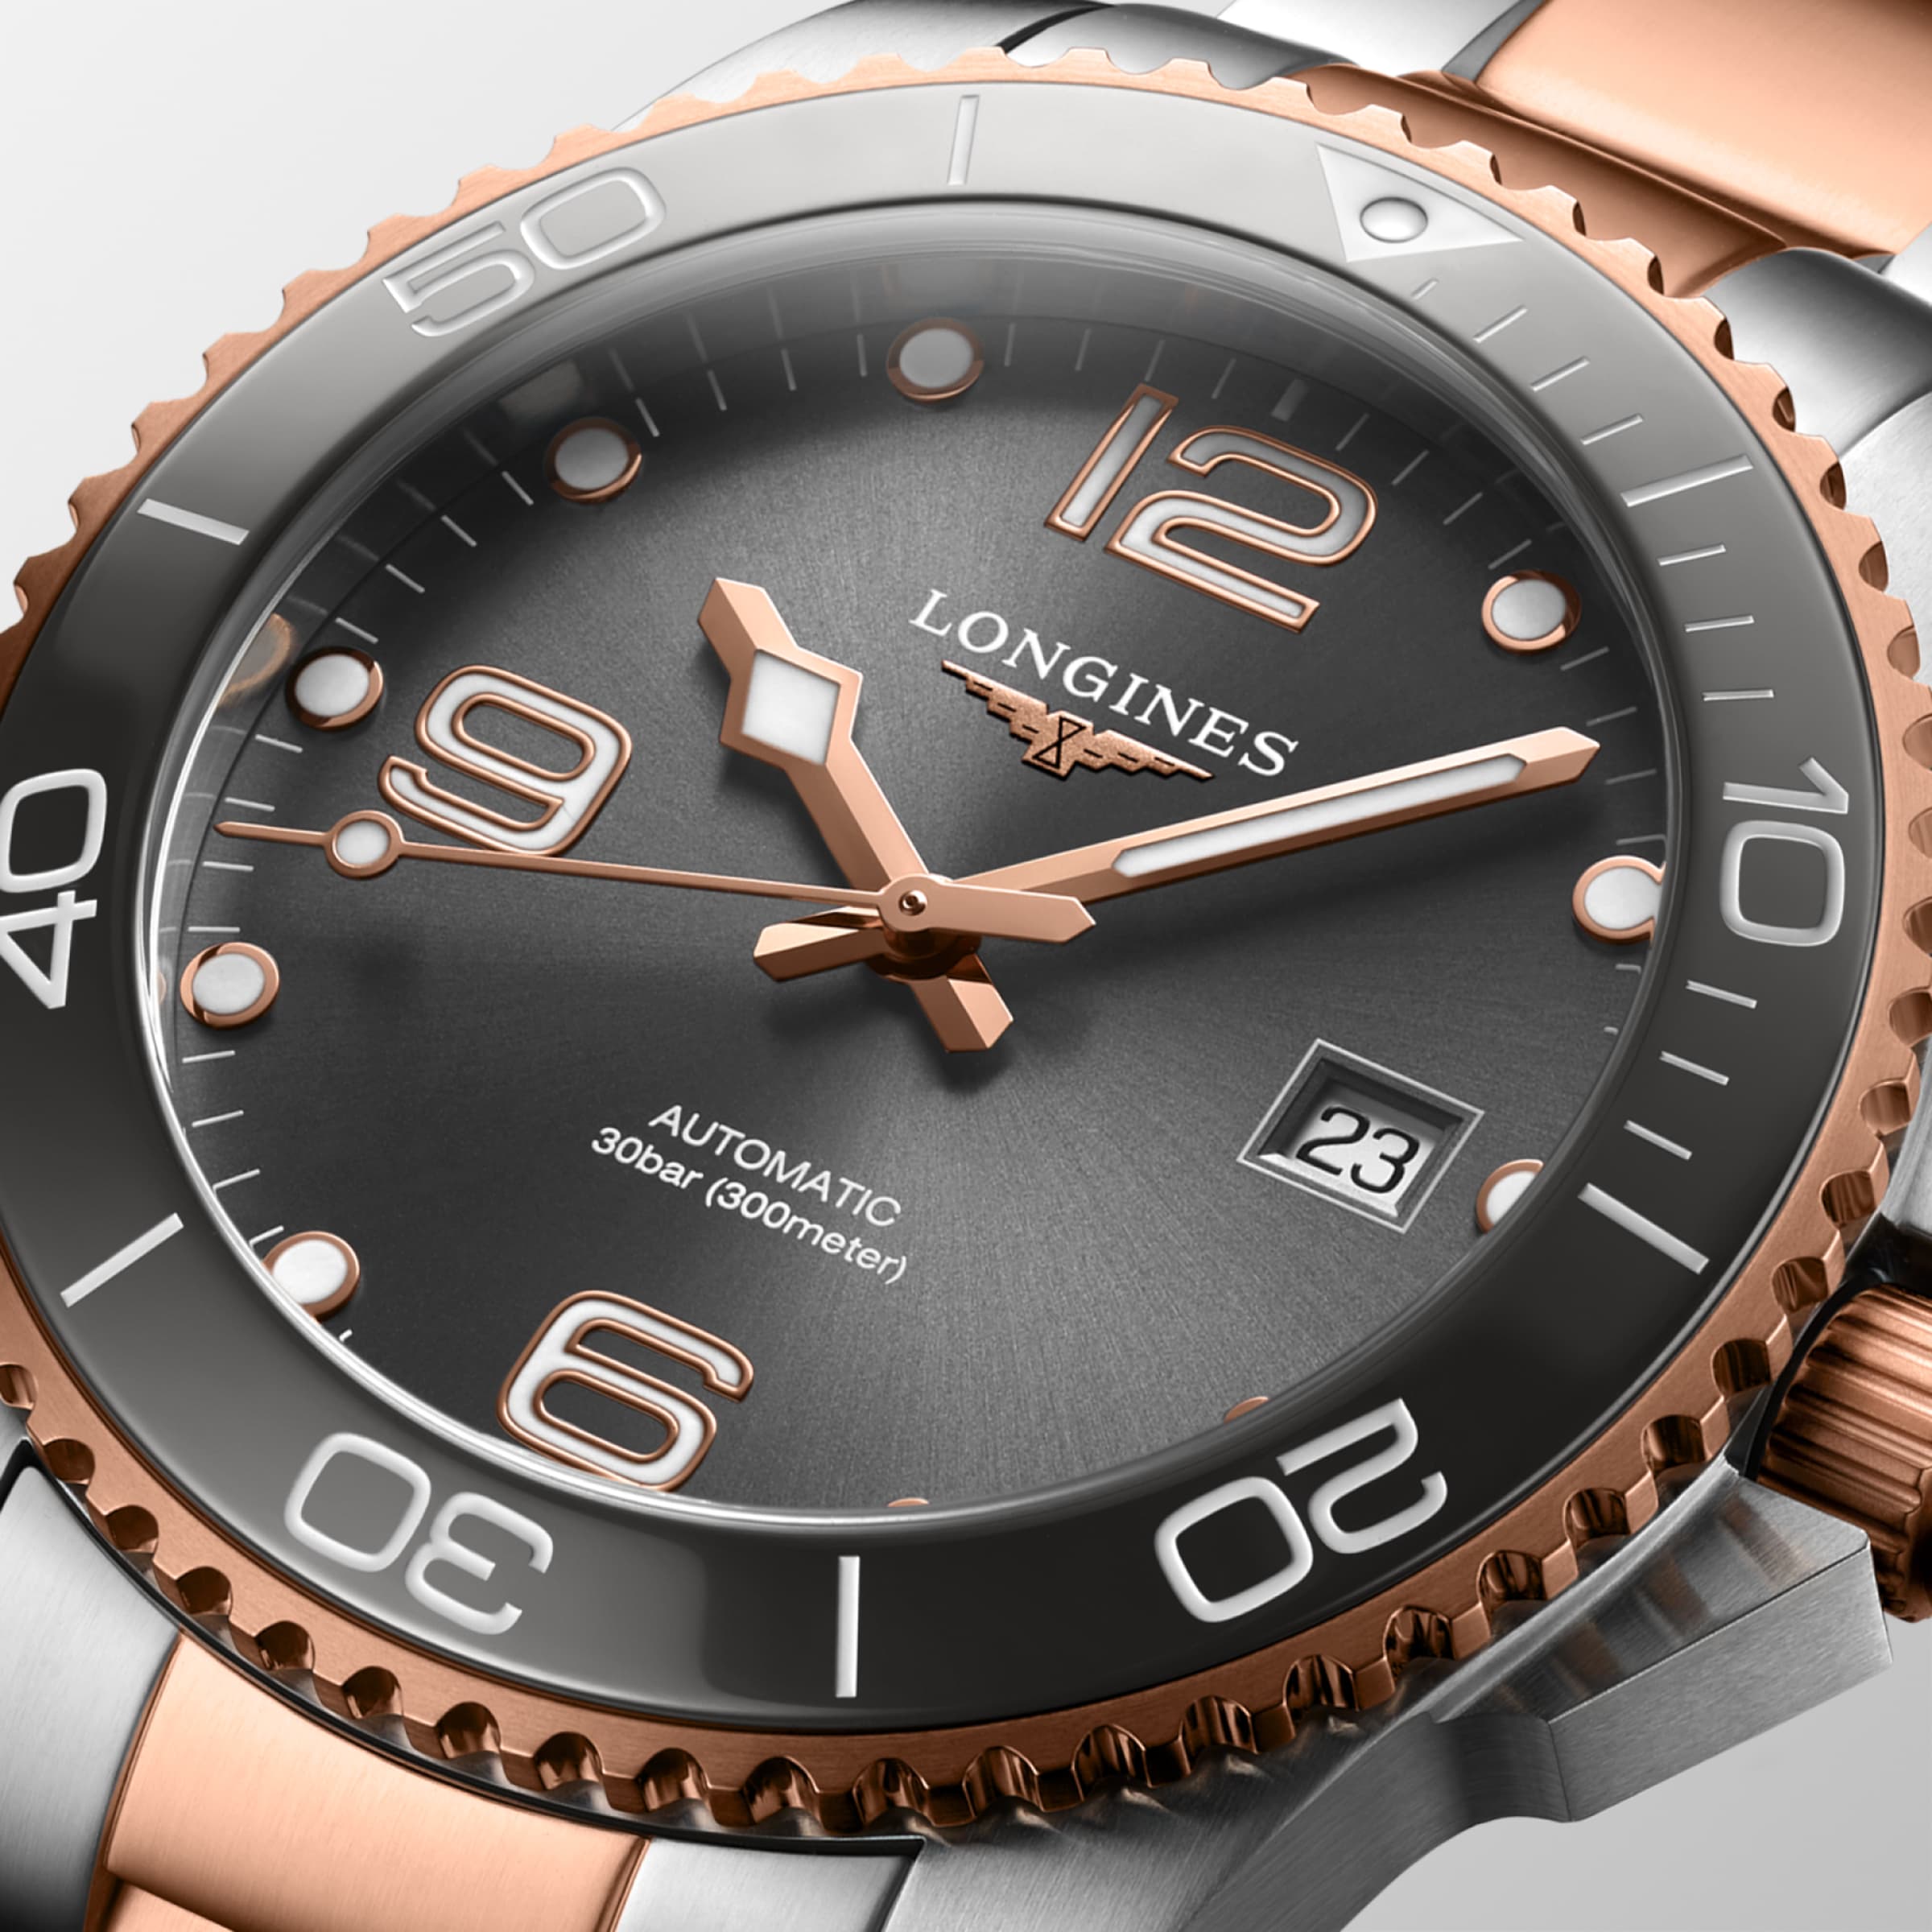 Longines HYDROCONQUEST Automatic Stainless steel and ceramic bezel Watch - L3.781.3.78.7